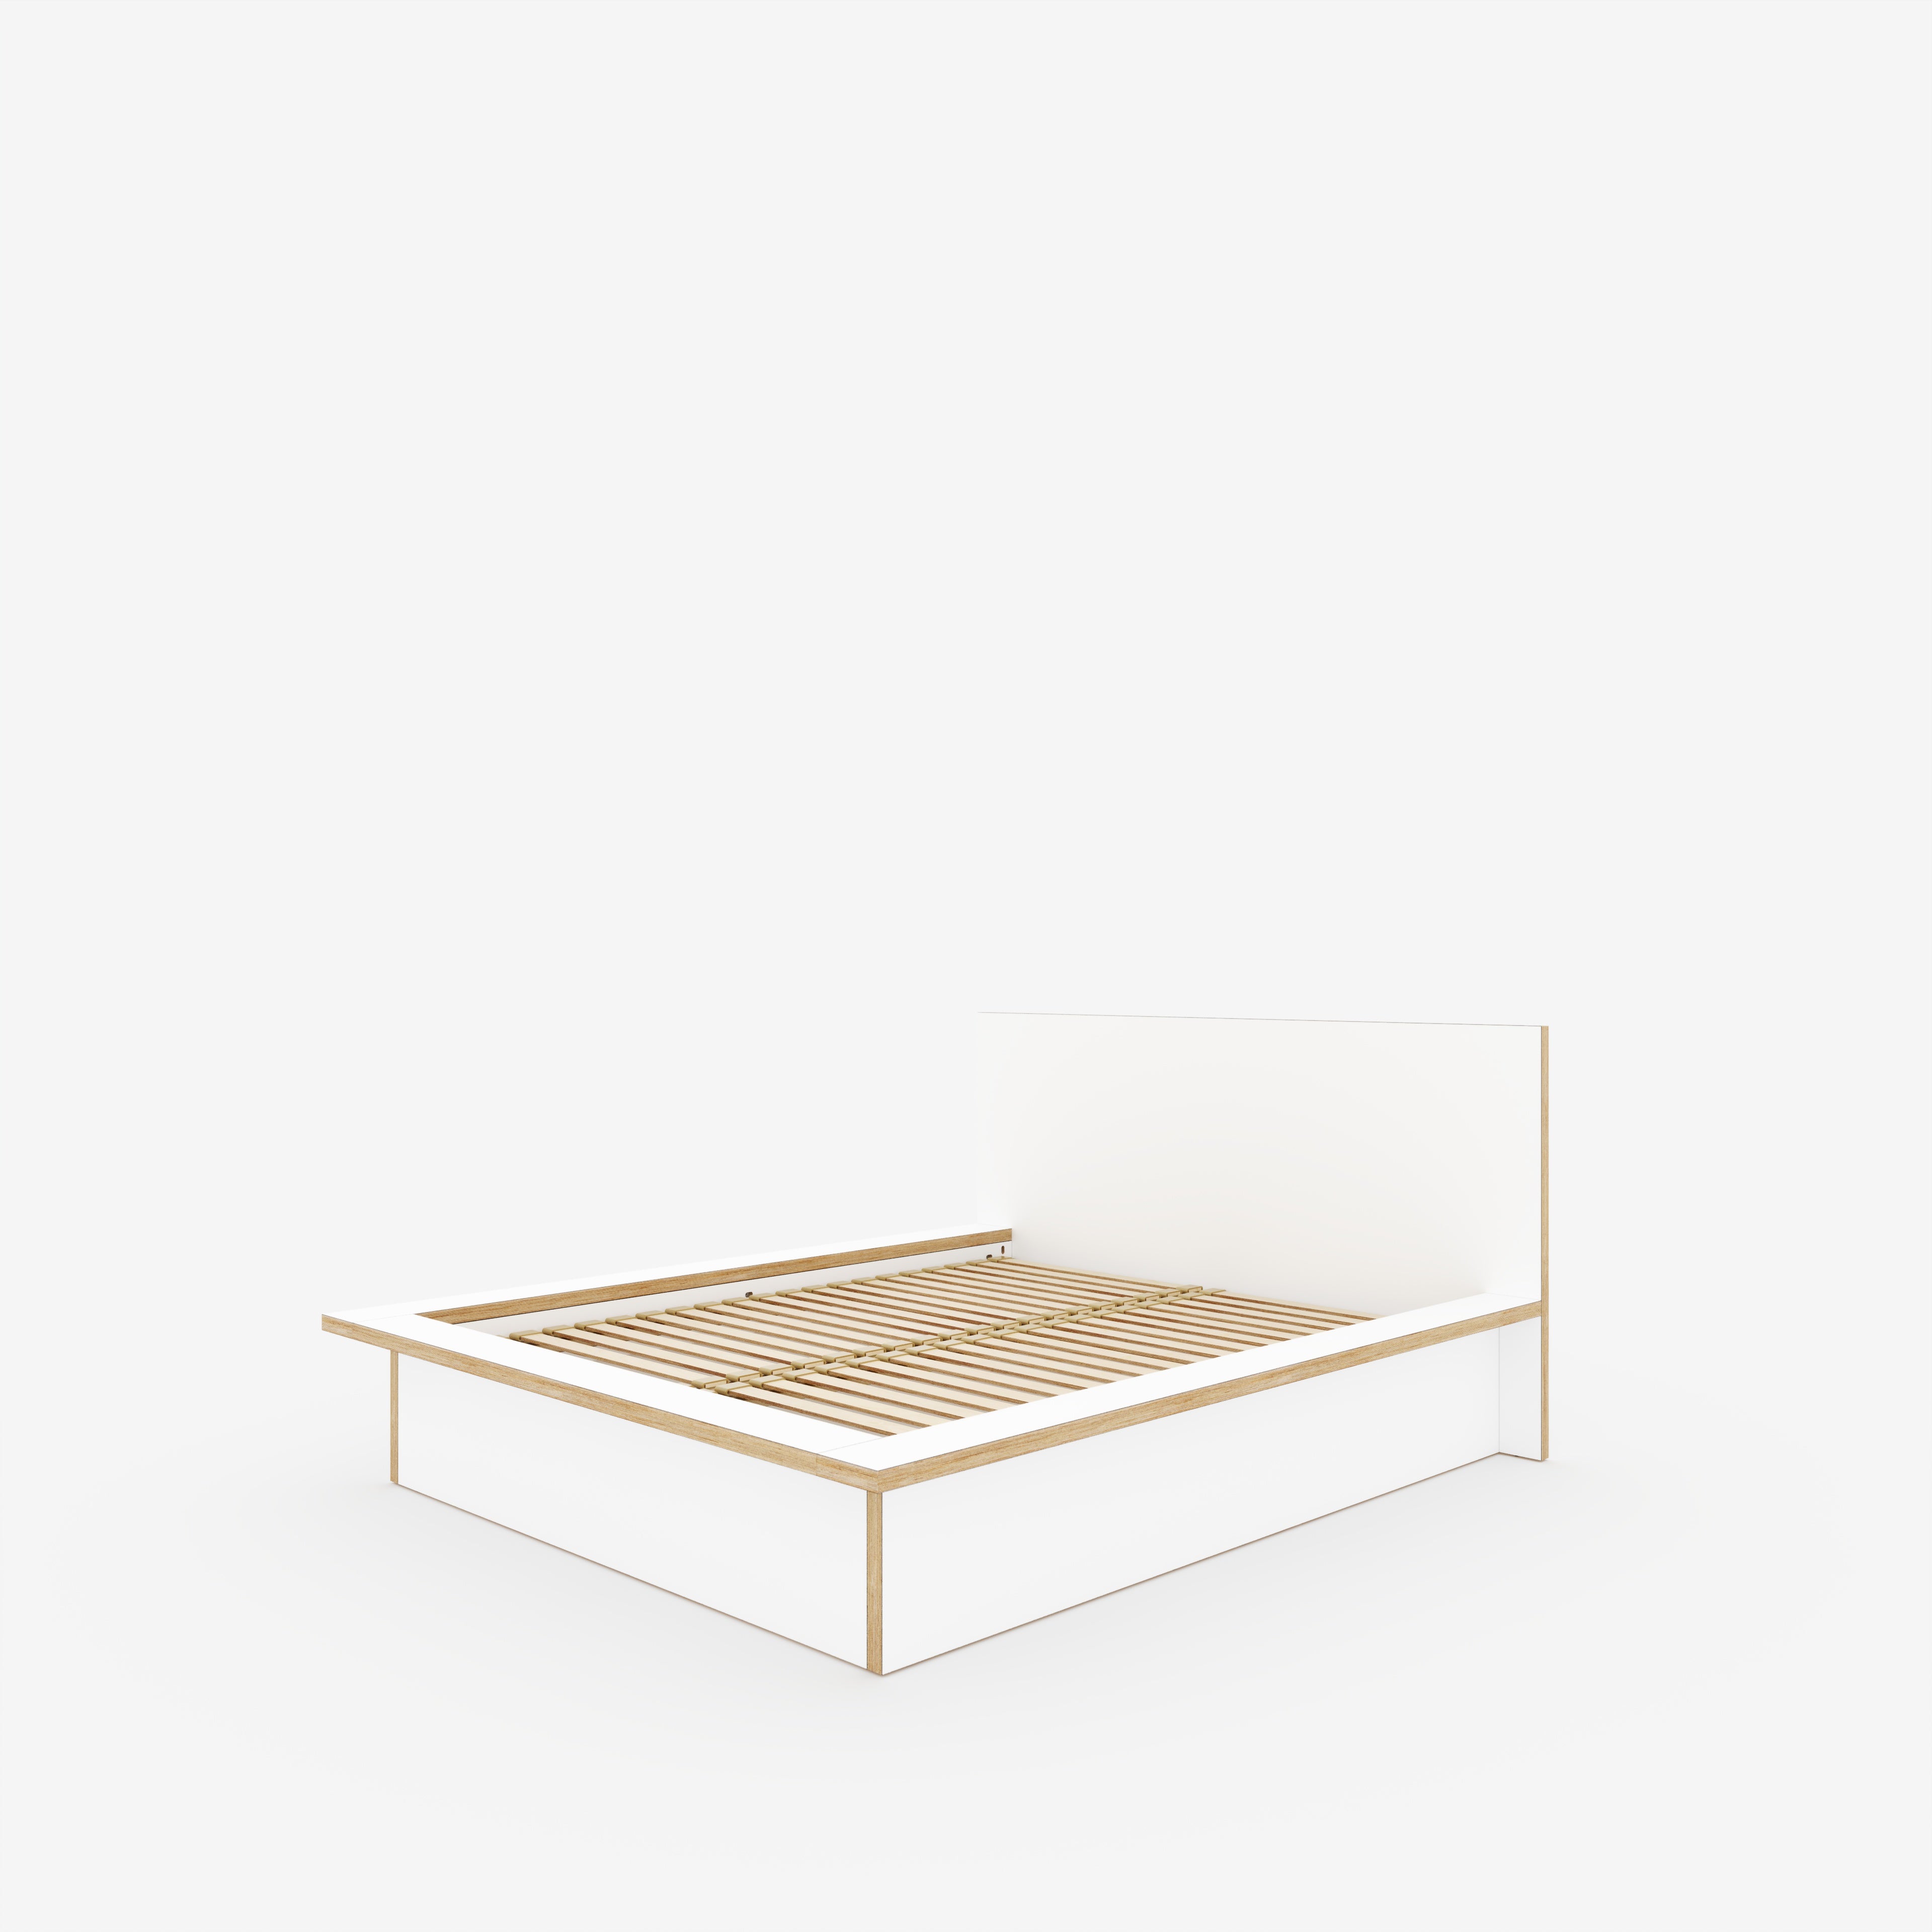 Plywood Platform Bed - Plywood Formica White - European King 1600(w) x 2000(d) High